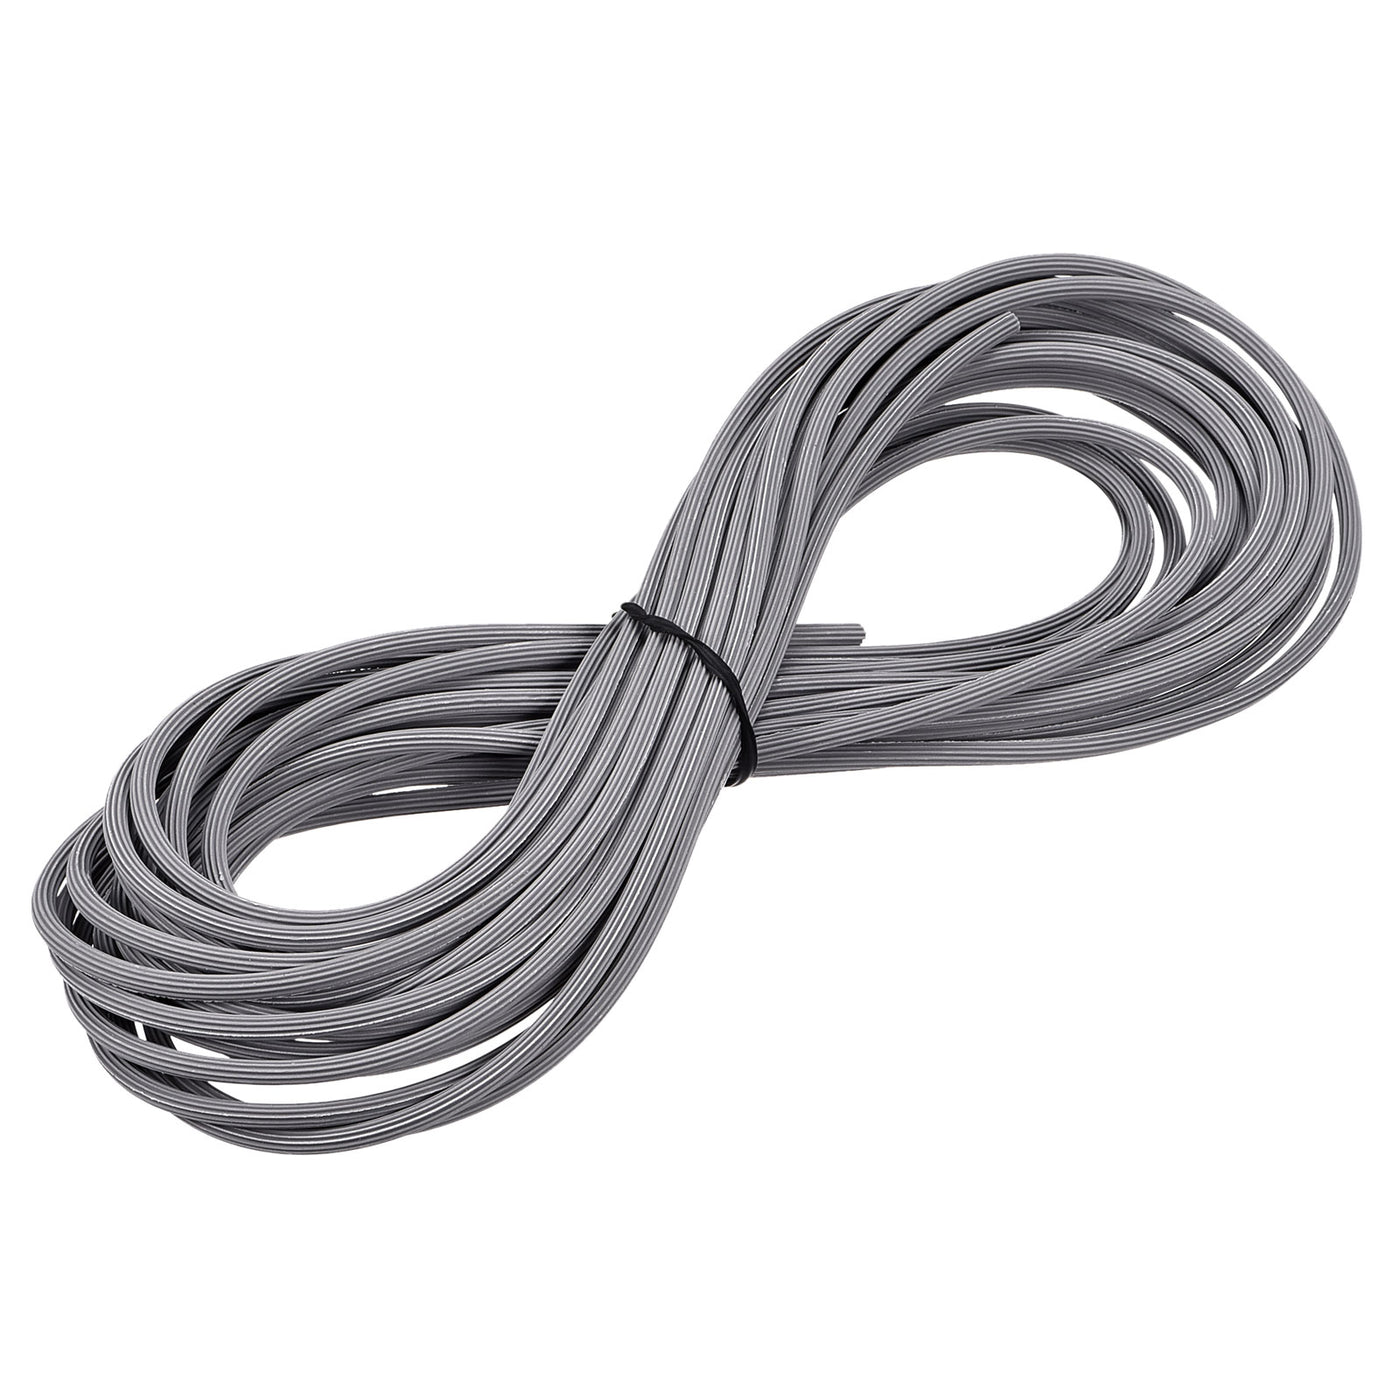 uxcell Uxcell Screen Spline 7.5M/24.61Ft Length PVC Sealing Strip Retainer, 3mm OD Gray